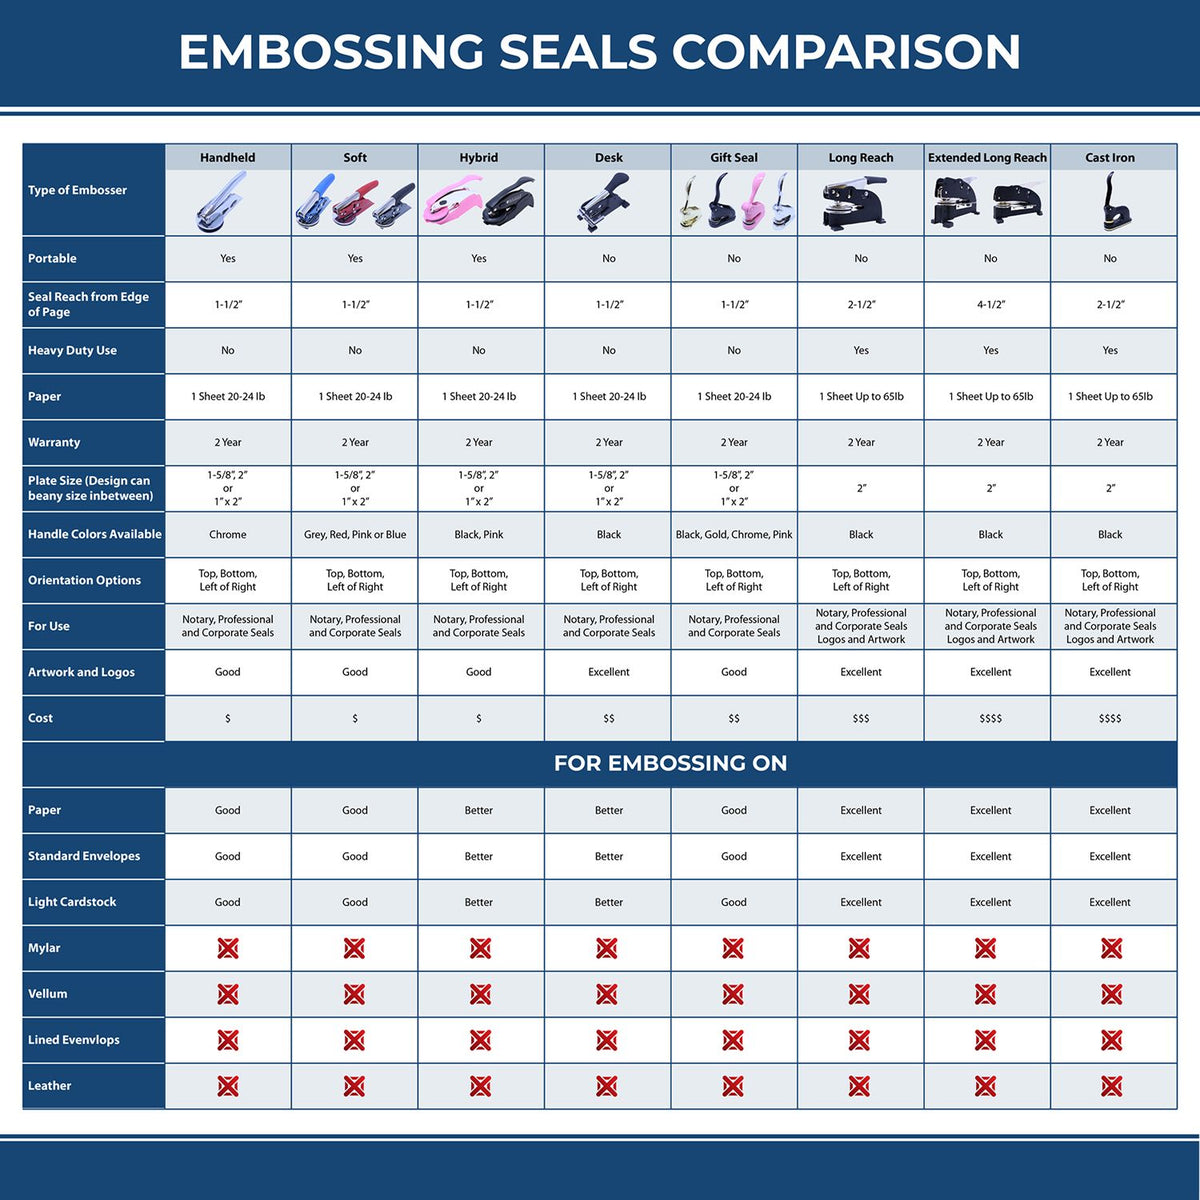 A comparison chart for the different types of mount models available for the Heavy Duty Cast Iron Kentucky Land Surveyor Seal Embosser.